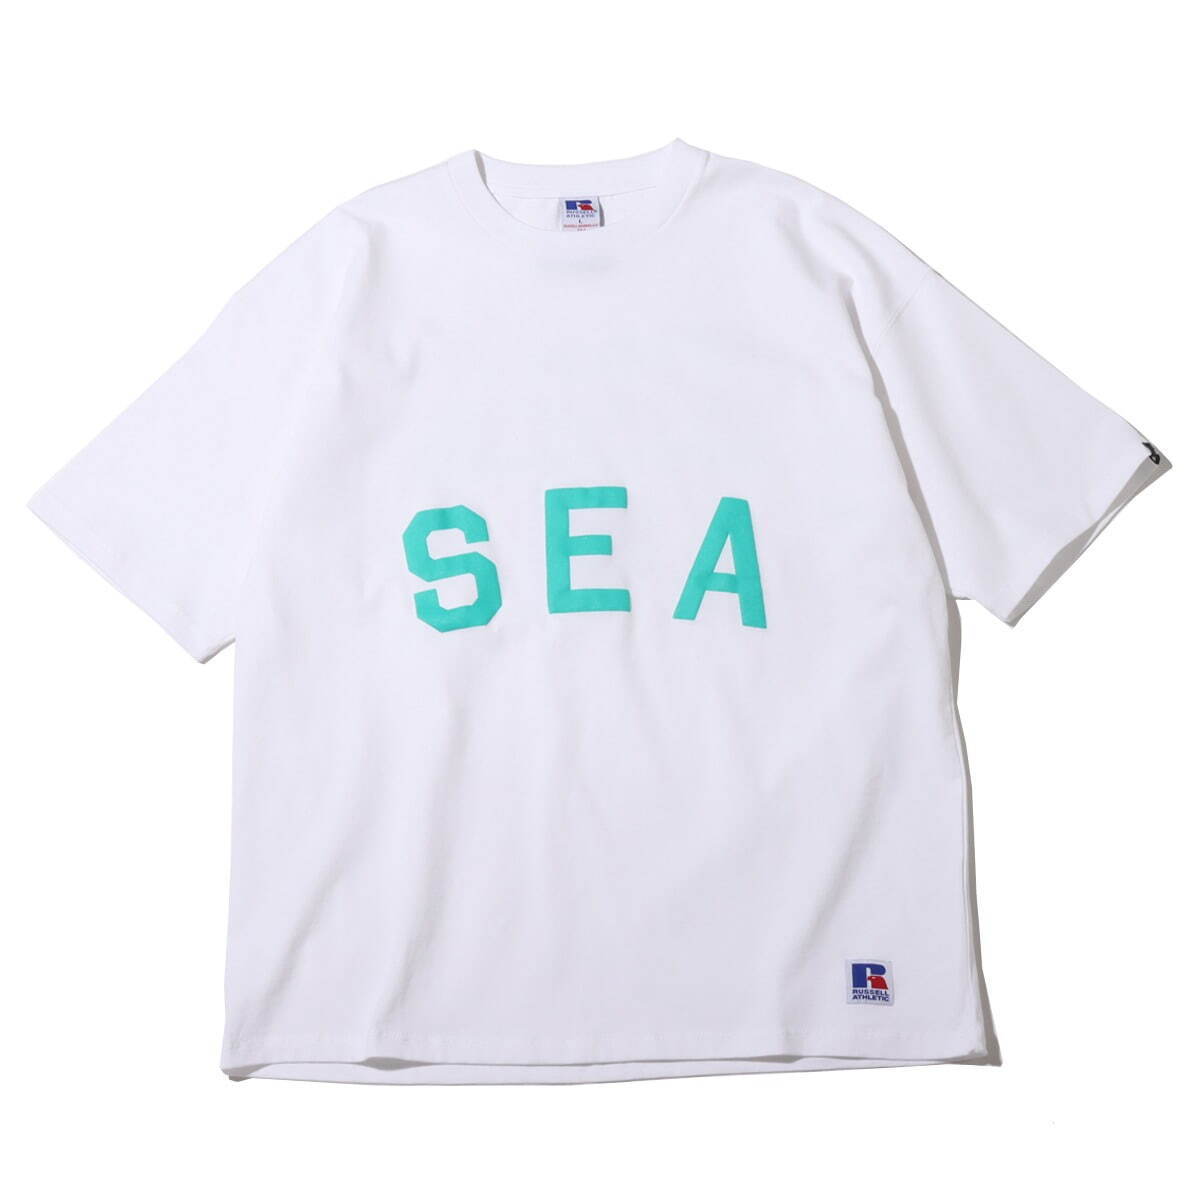 「WIND AND SEA × atmos × RUSSELL ATHLETIC」7,700円